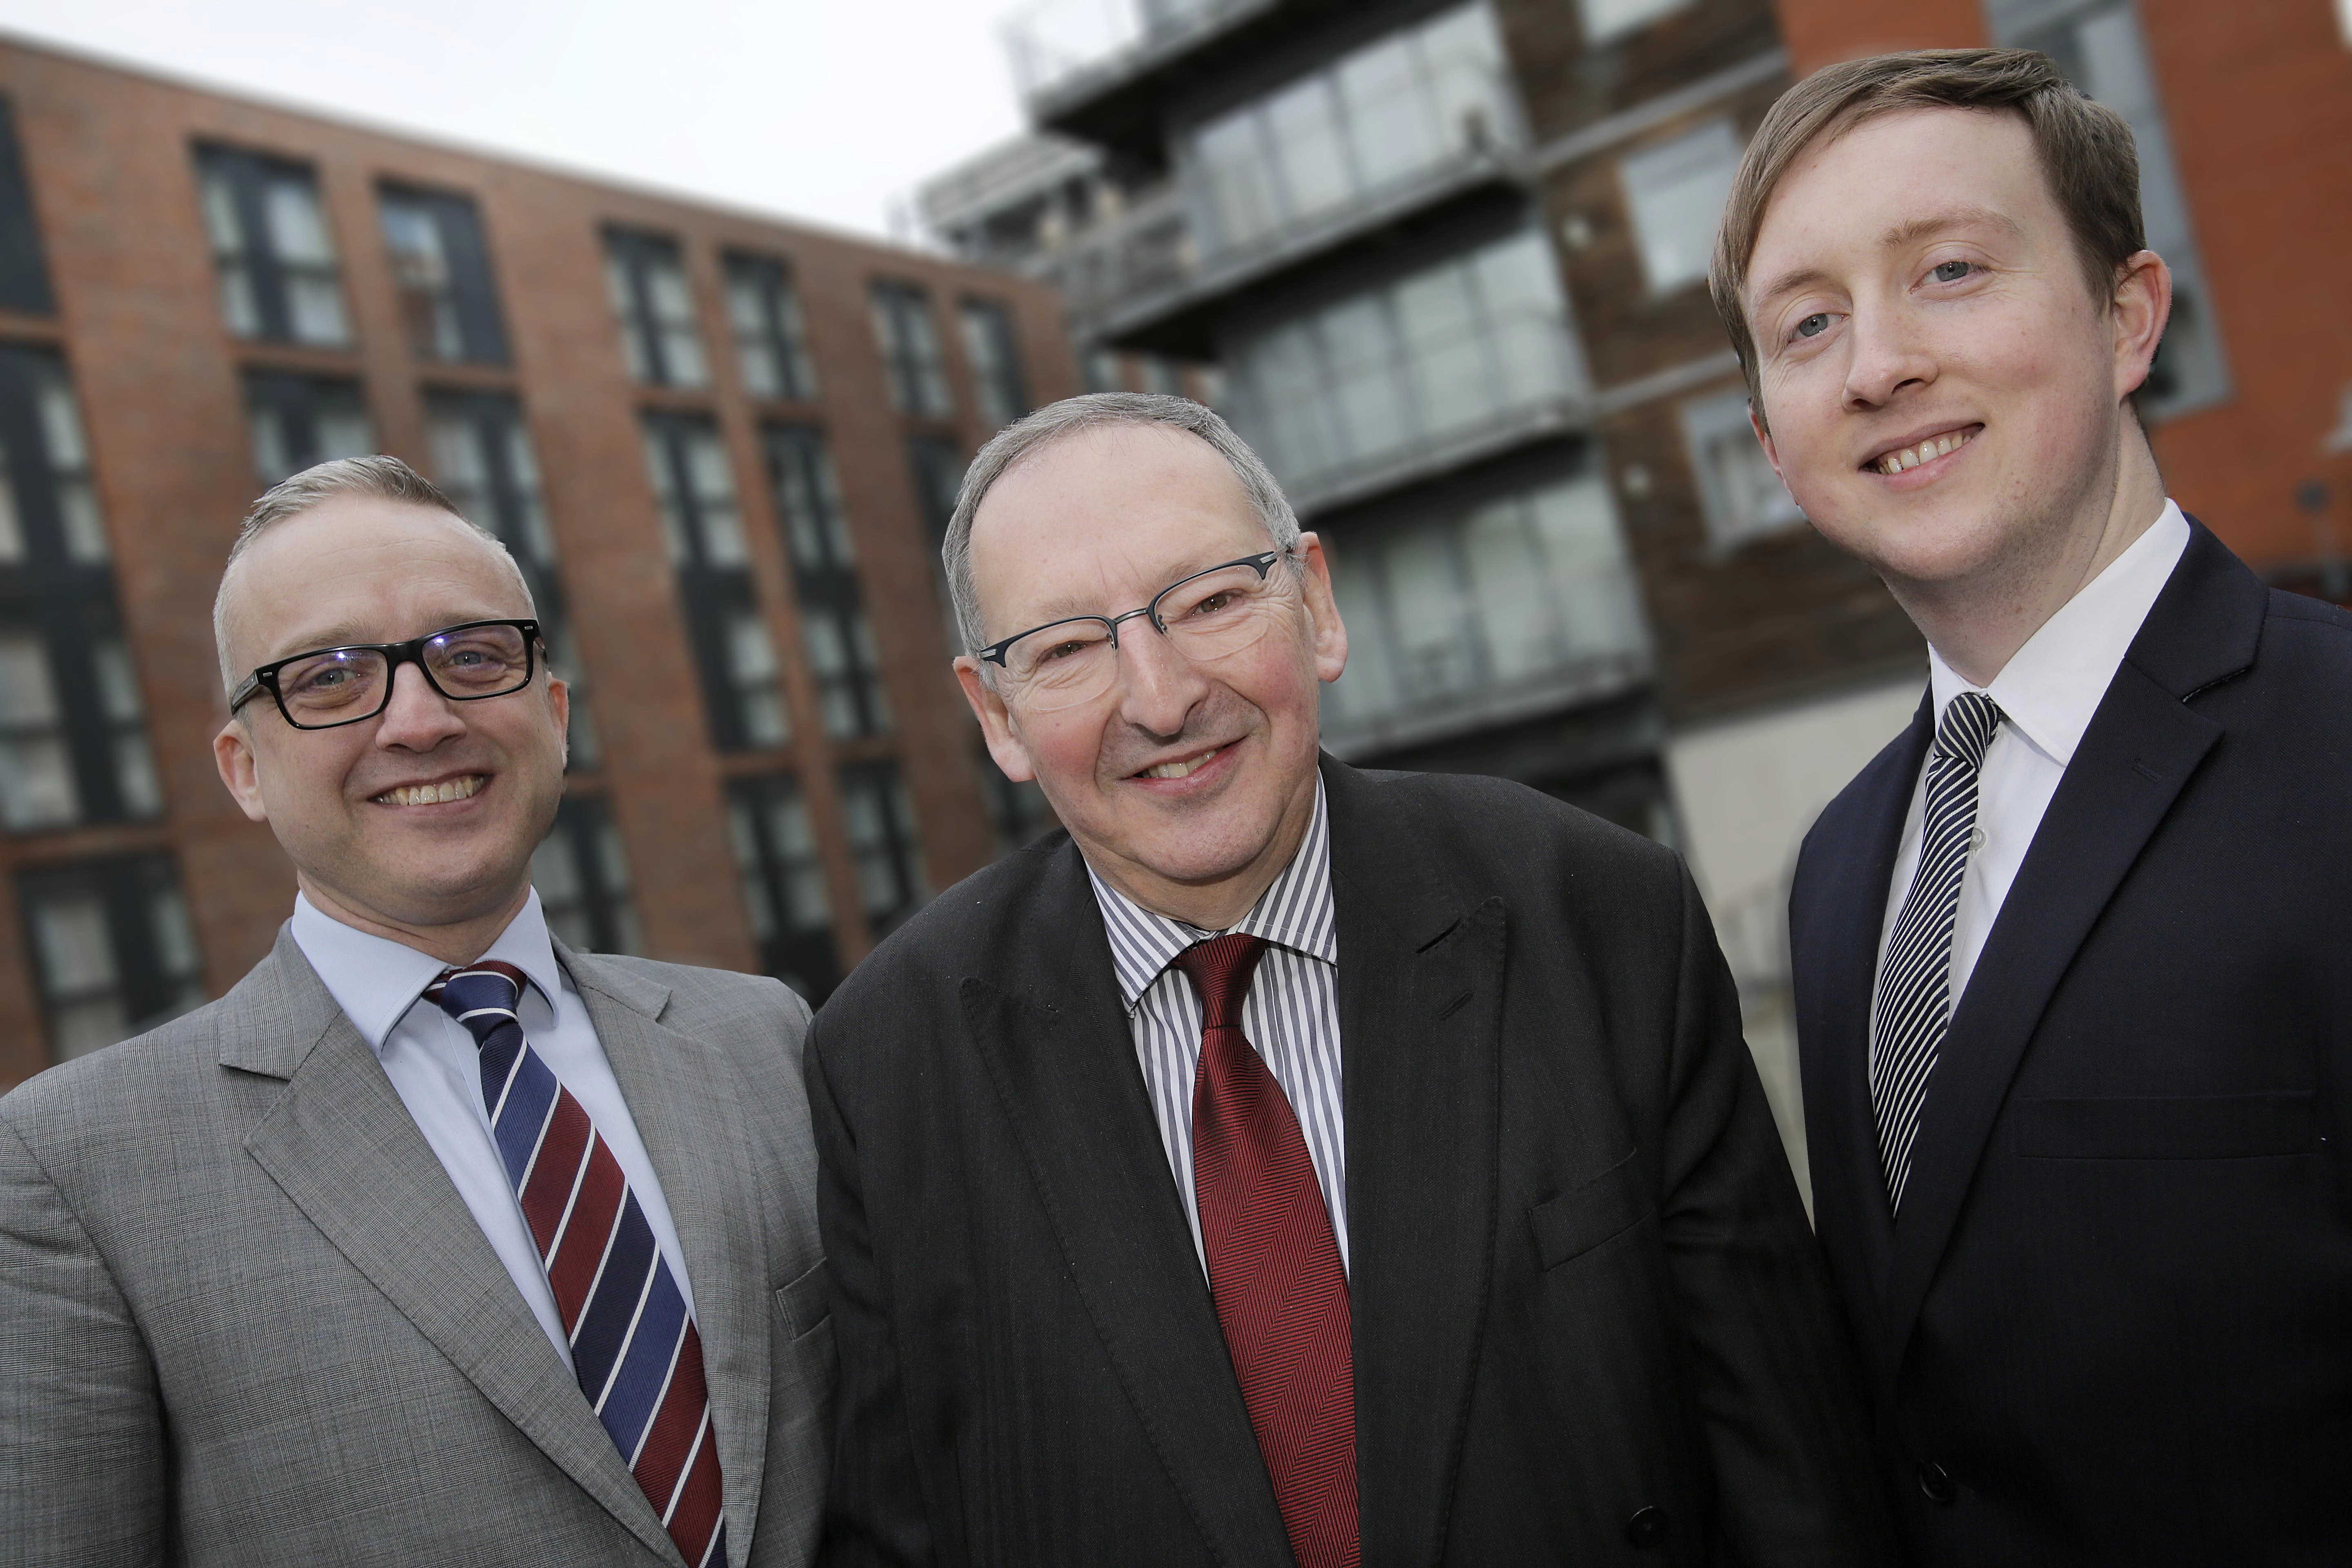 CAPTION: Director, Paul Pinder (left) and associate solicitor, Thomas Walsh (right), join Martyn Liberson’s property litigation team at law firm, Emms Gilmore Liberson.